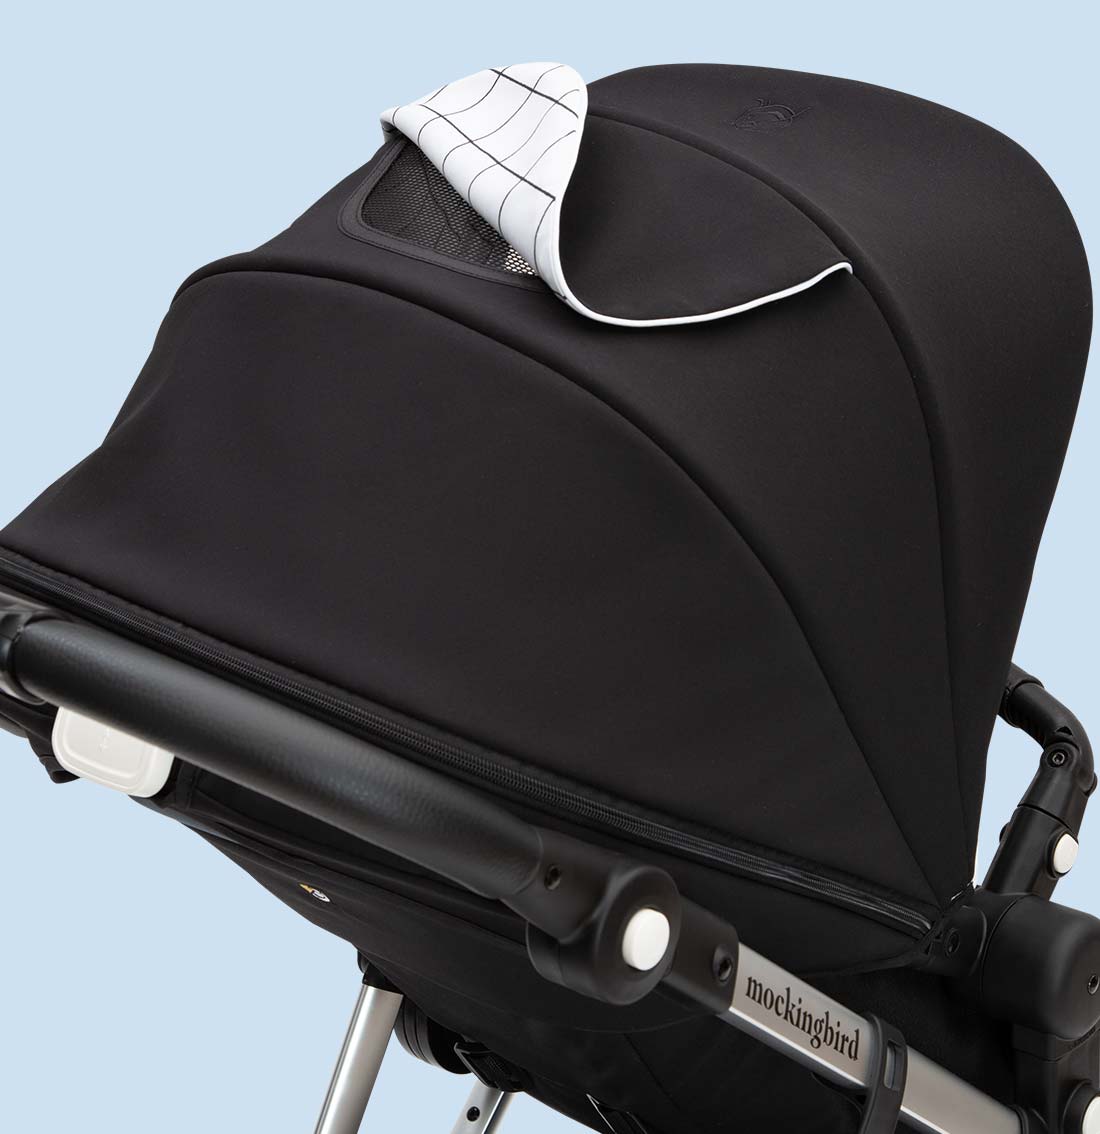 Black modern stroller with white-checked baby blanket draped over the canopy, set against a plain light blue background.